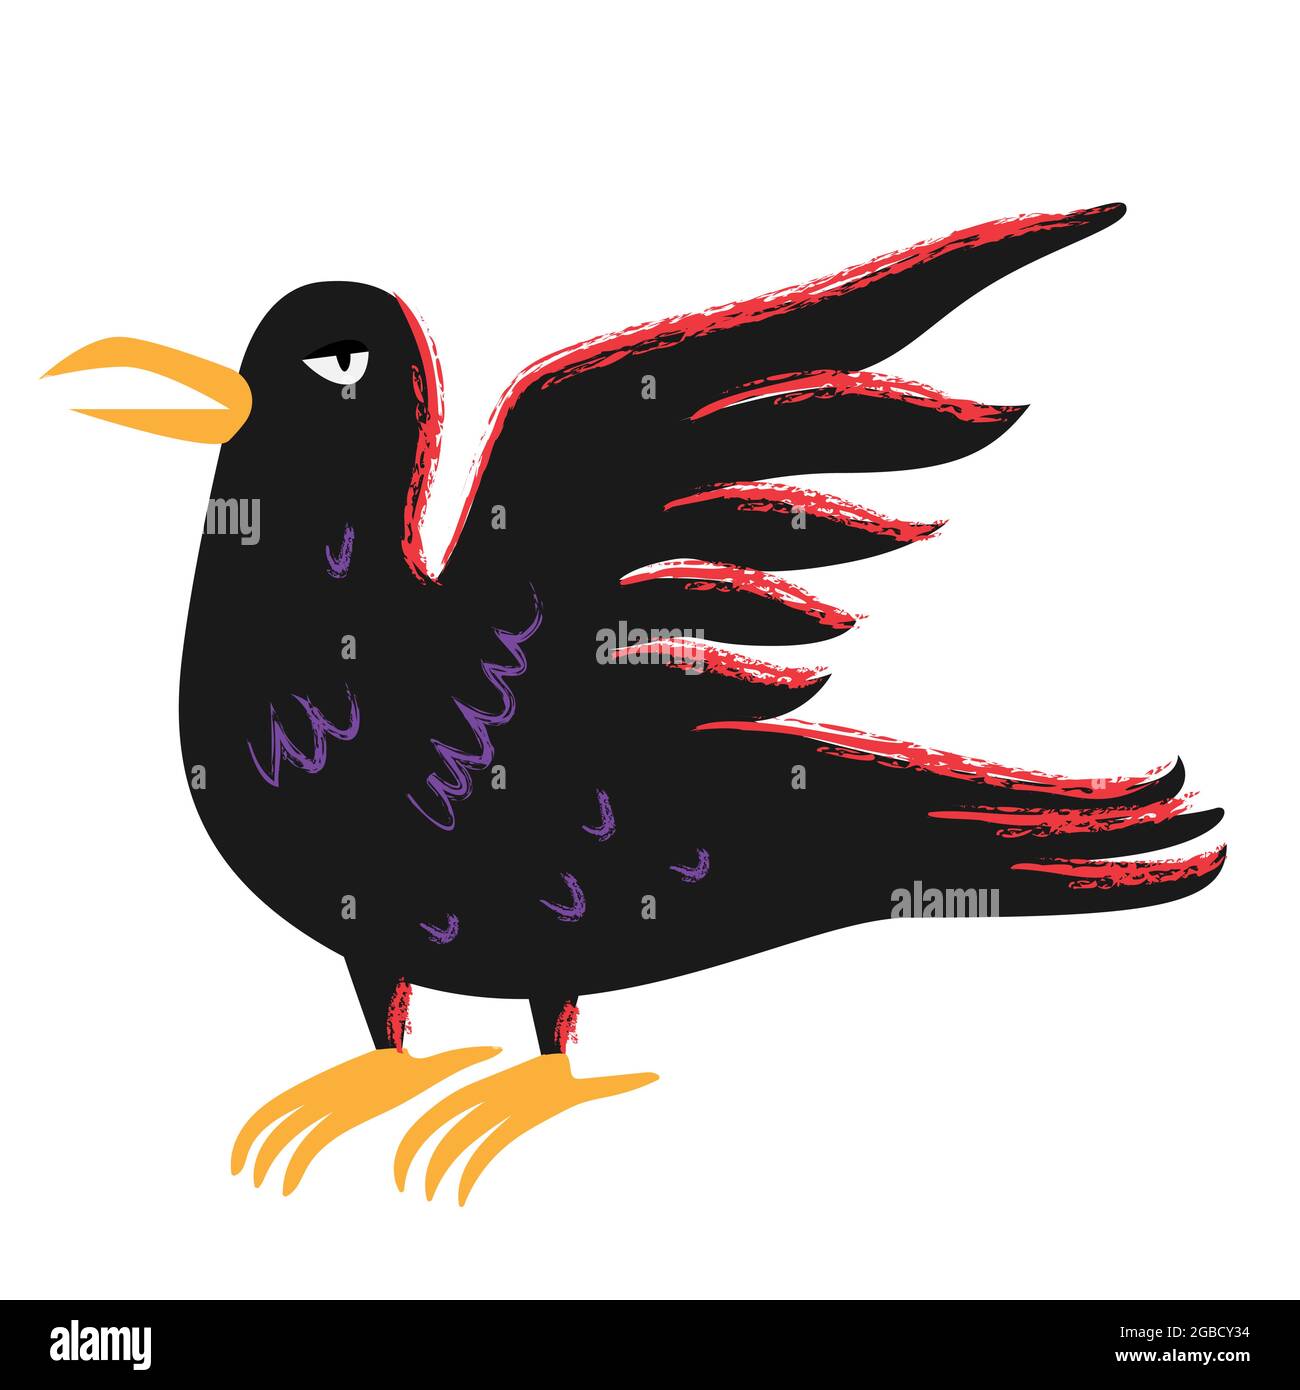 Black raven. The raven of the witch. Halloween crow black bird with open wings in cartoon flat style. Stock Vector